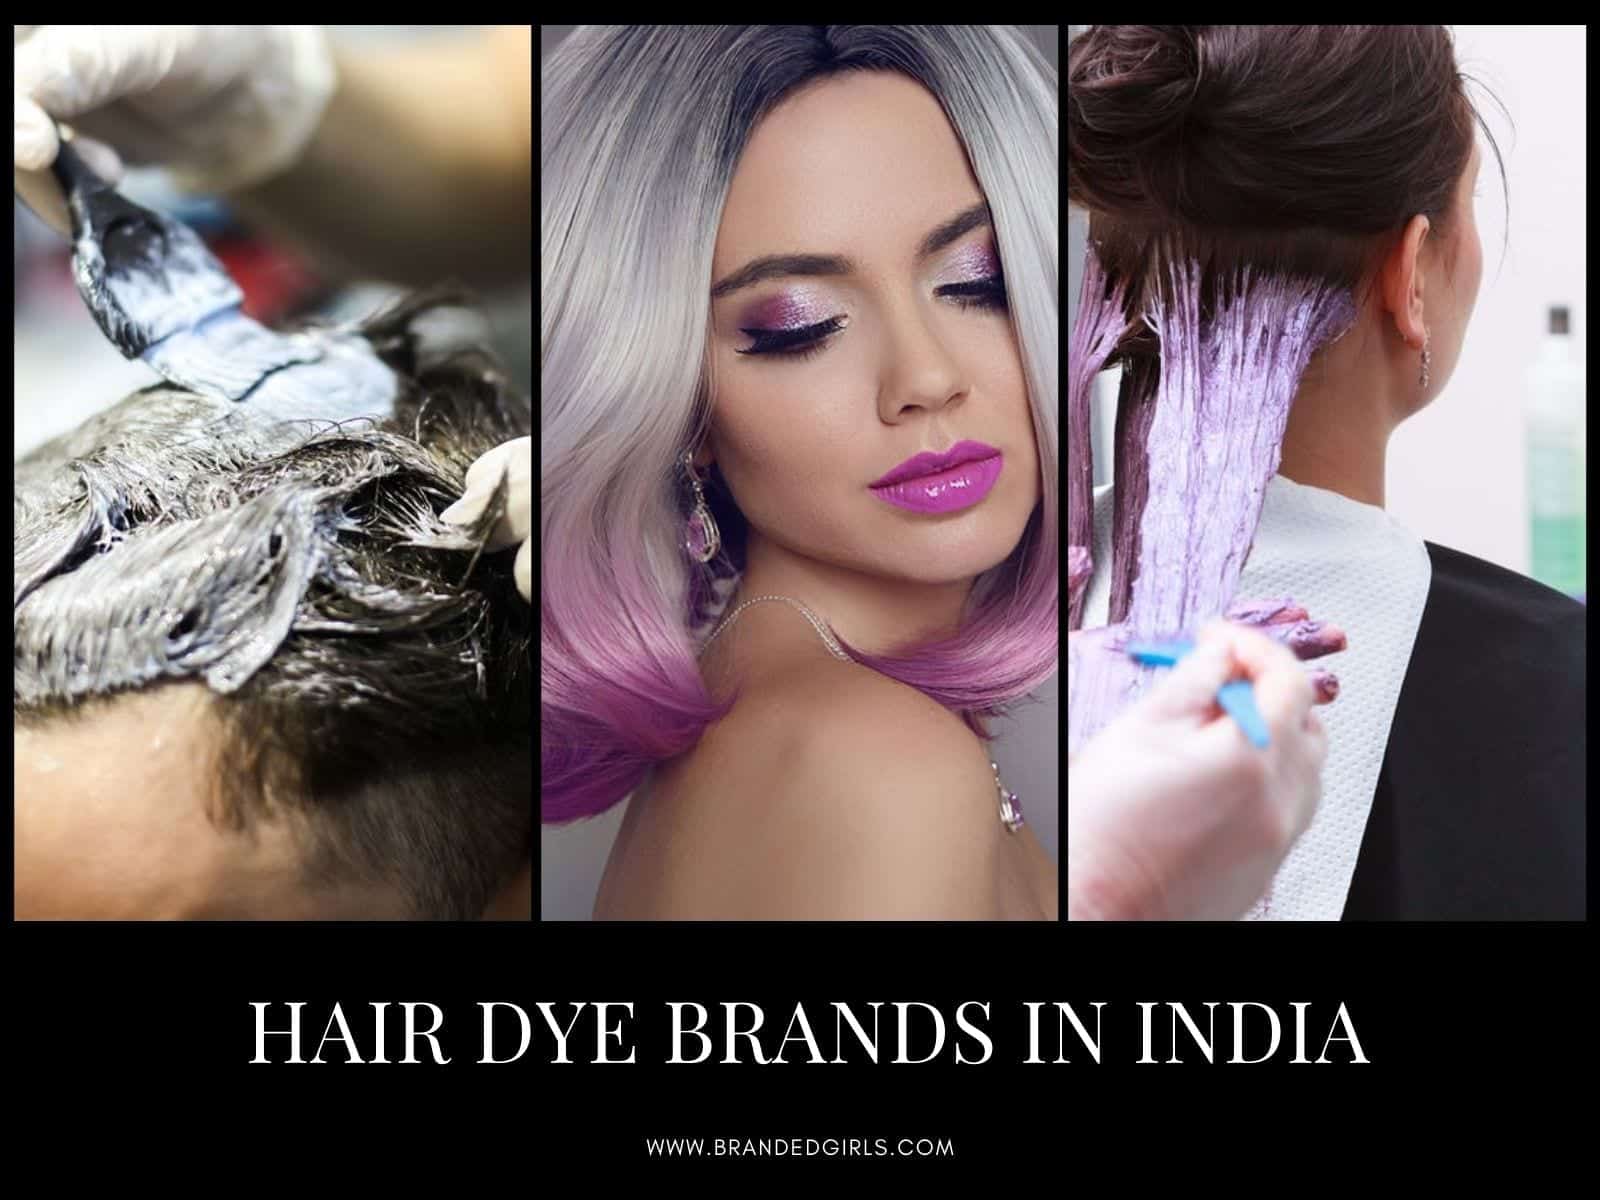 5. "Best Pastel Blue Ombre Hair Dye Brands for Every Budget" - wide 2